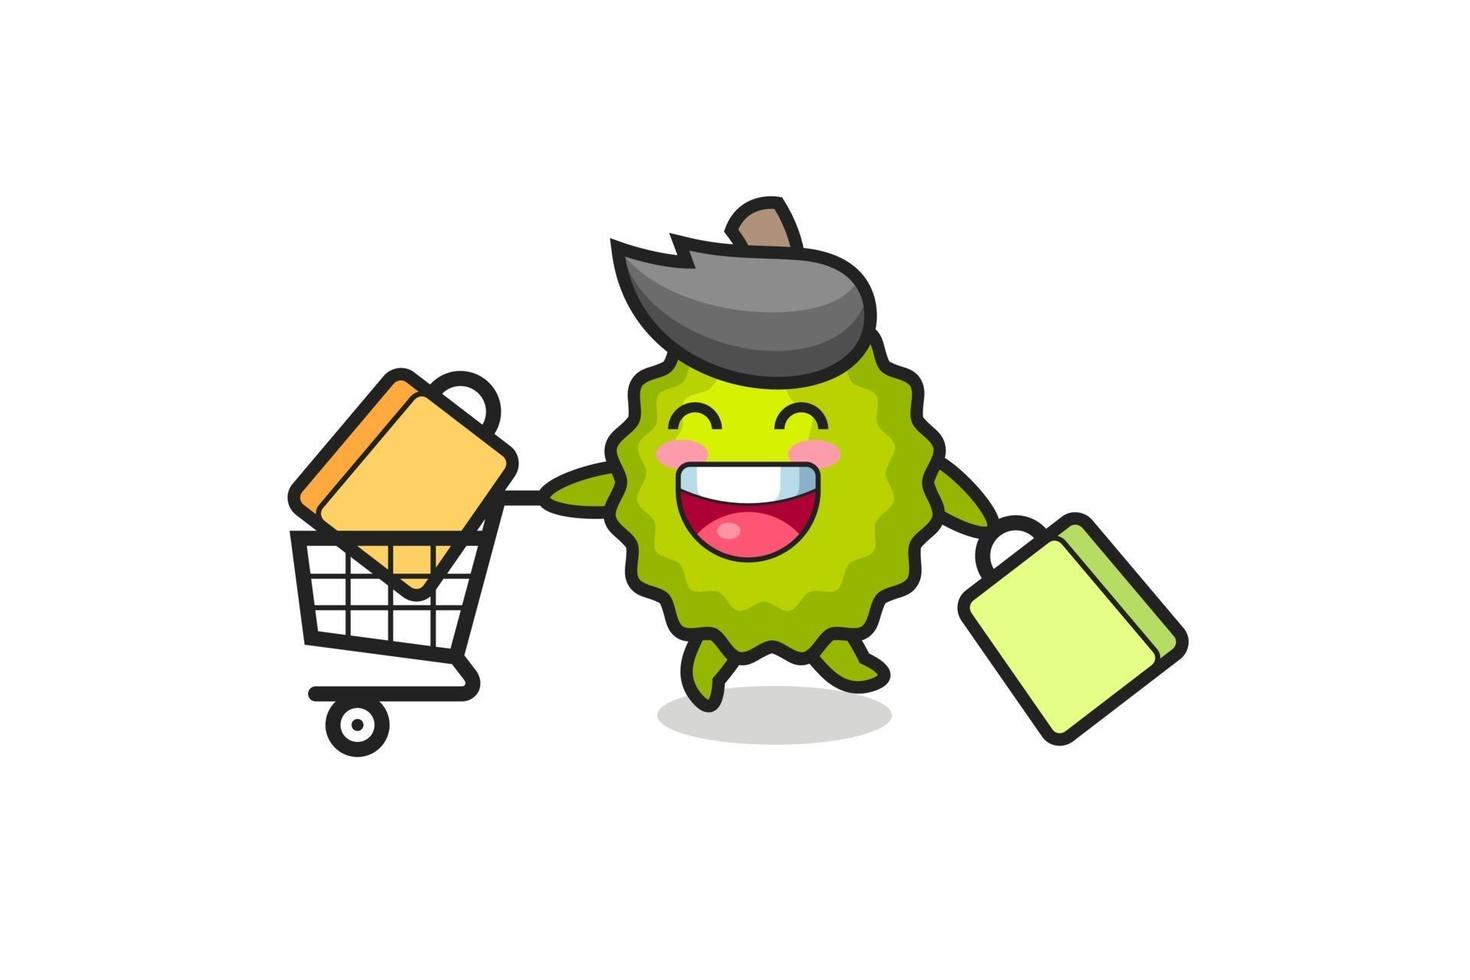 black Friday illustration with cute durian mascot vector